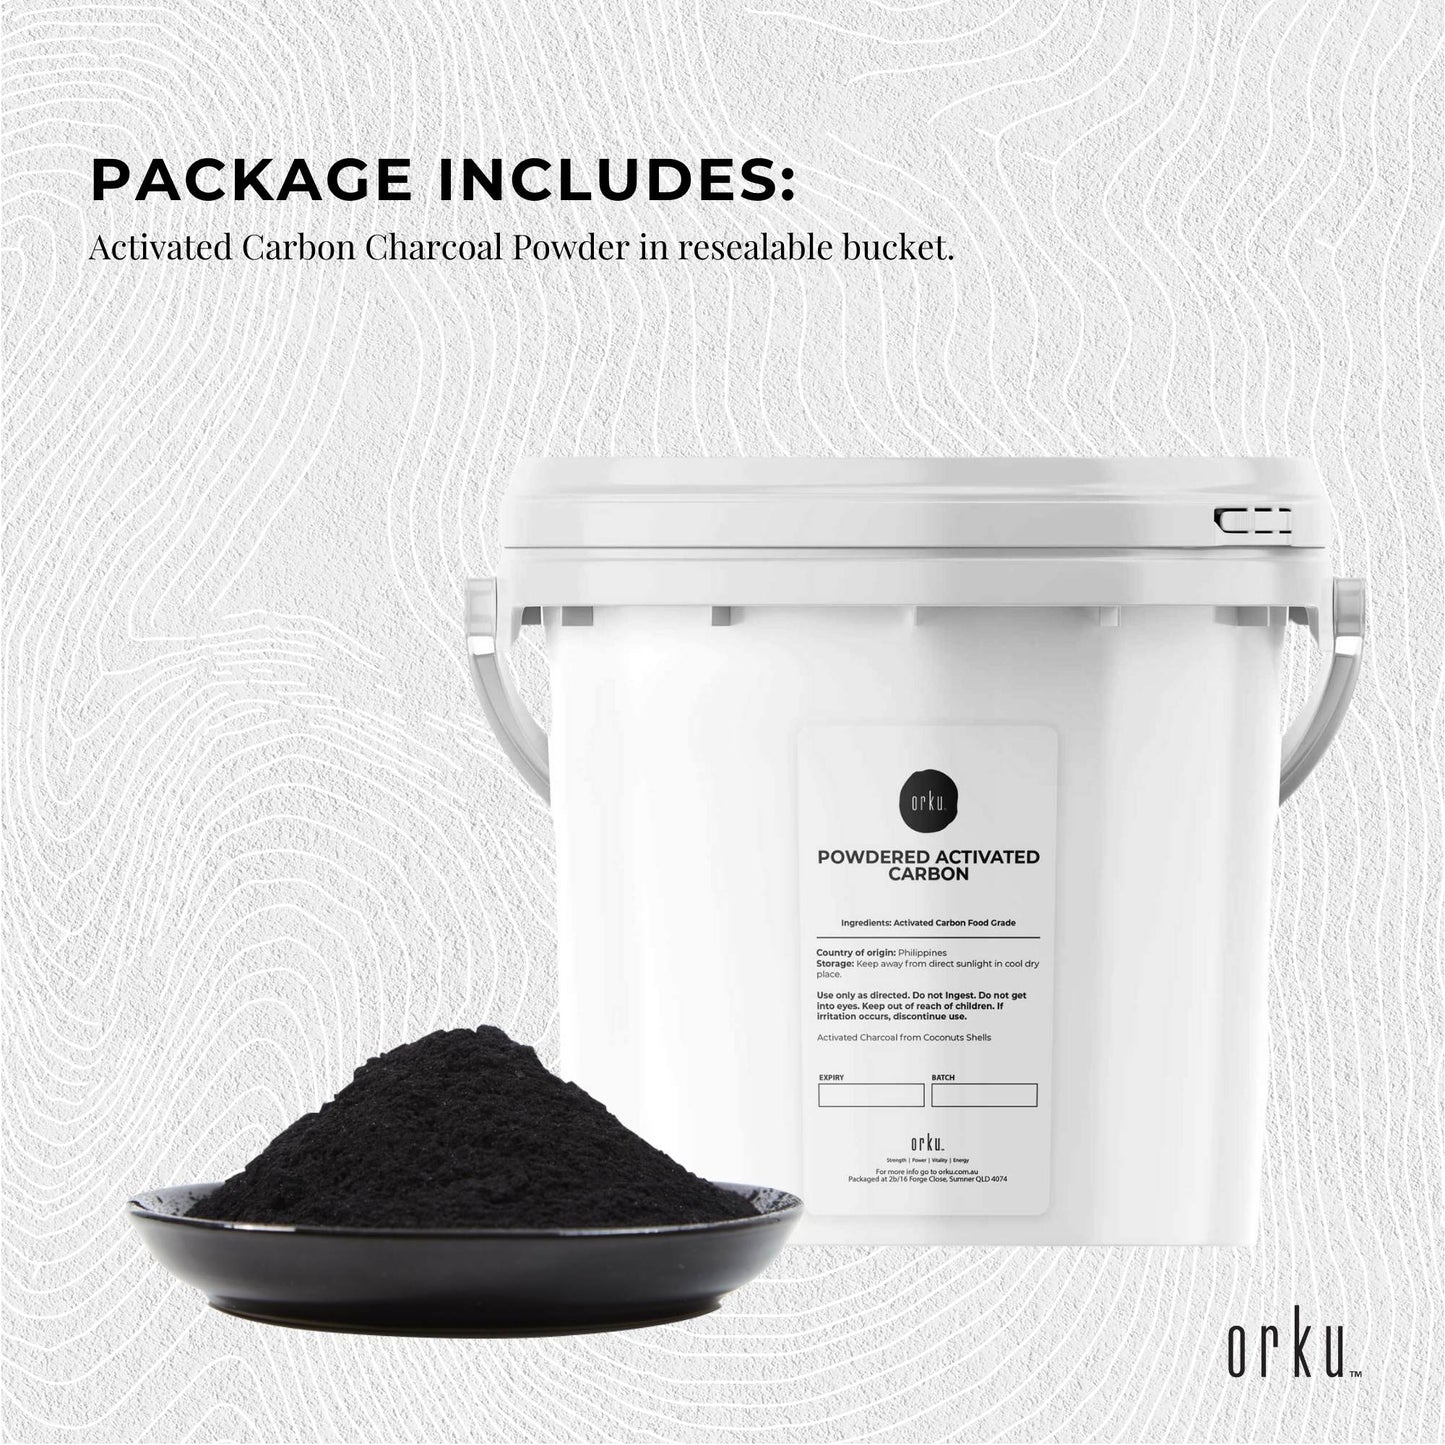 2.3Kg Activated Carbon Powder Coconut Charcoal Bucket - Teeth Whitening + Skin